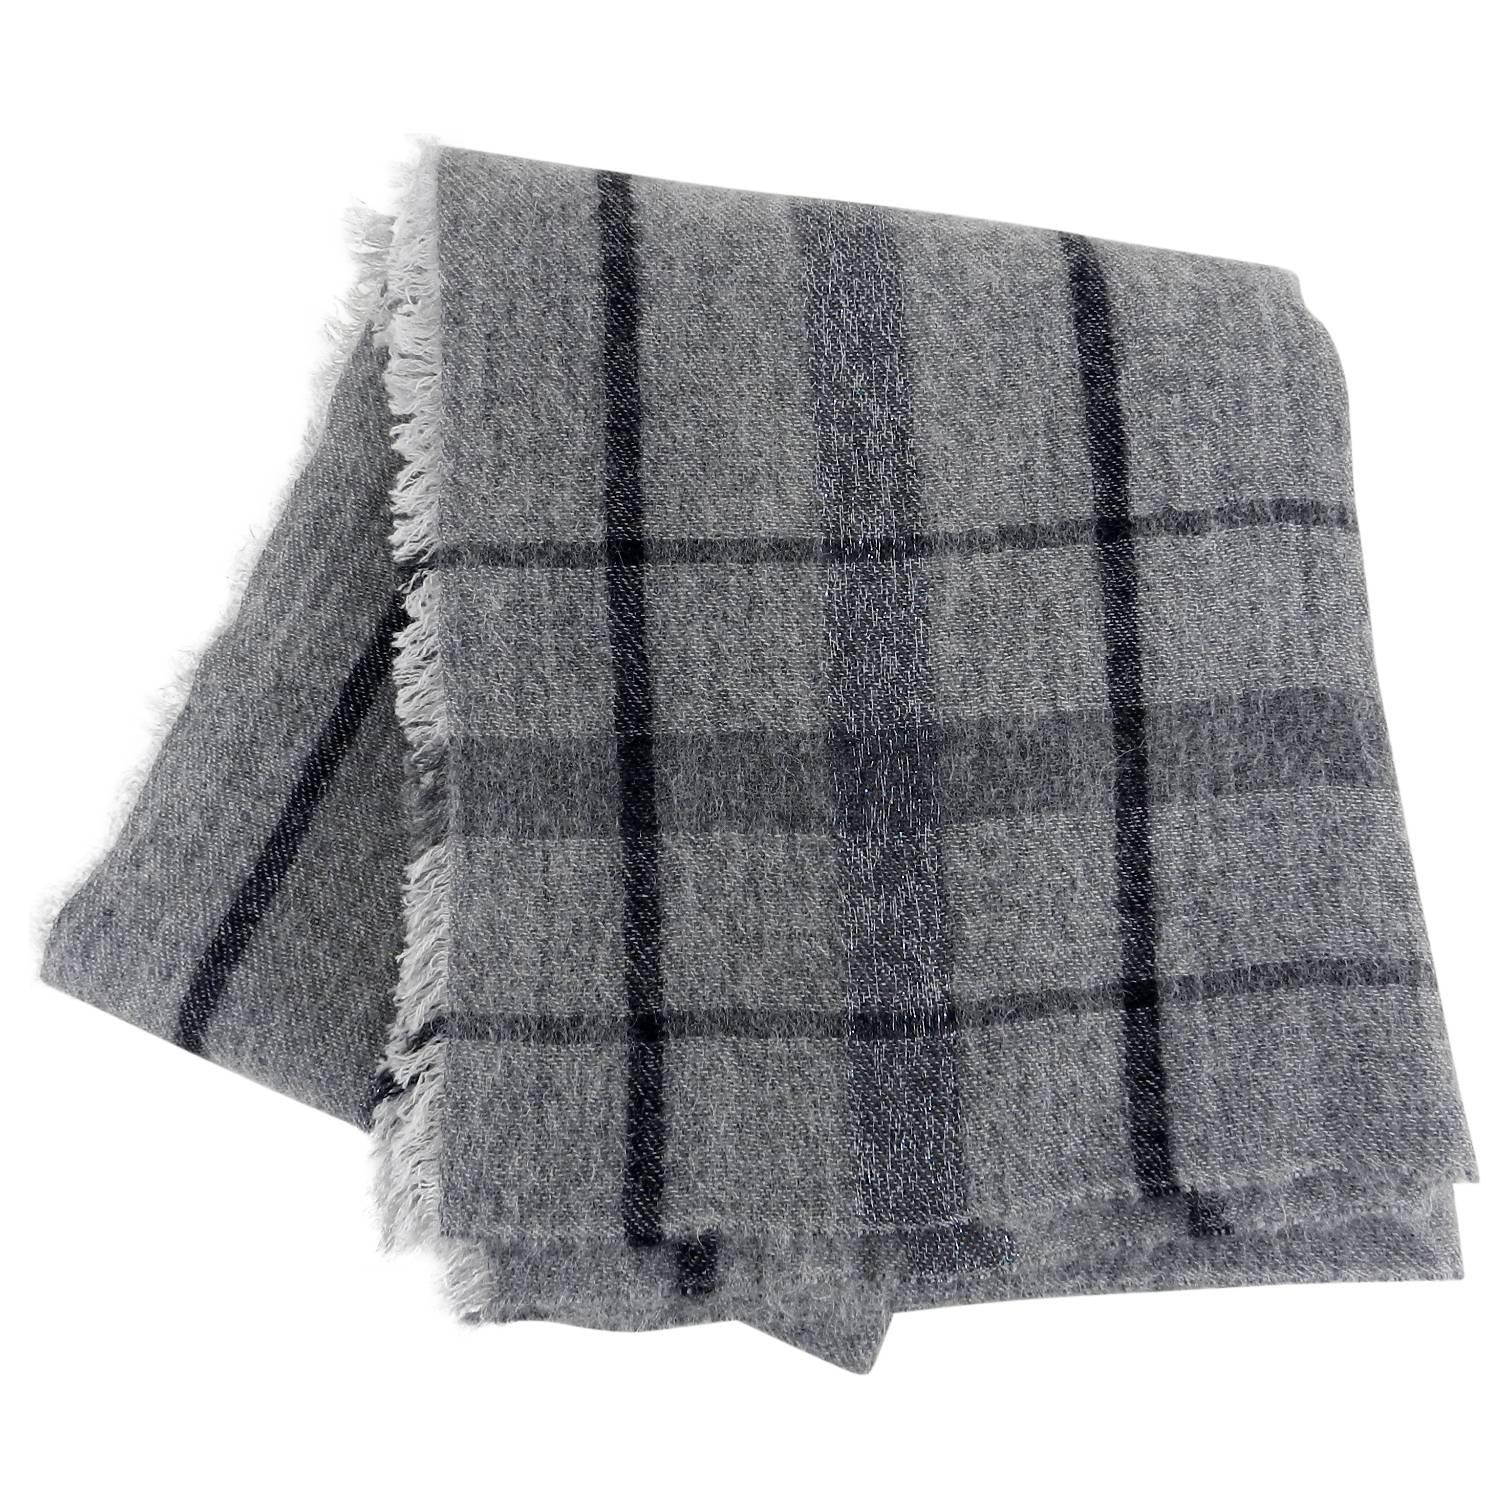 Brunello Cucinelli Grey Large Square Check Cashmere Shawl Wrap.  Medium dove grey with darker grey check pattern and fine silver metallic thread design. Material content tag is missing but is likely 88% cashmere with some mohair blend.  Excellent